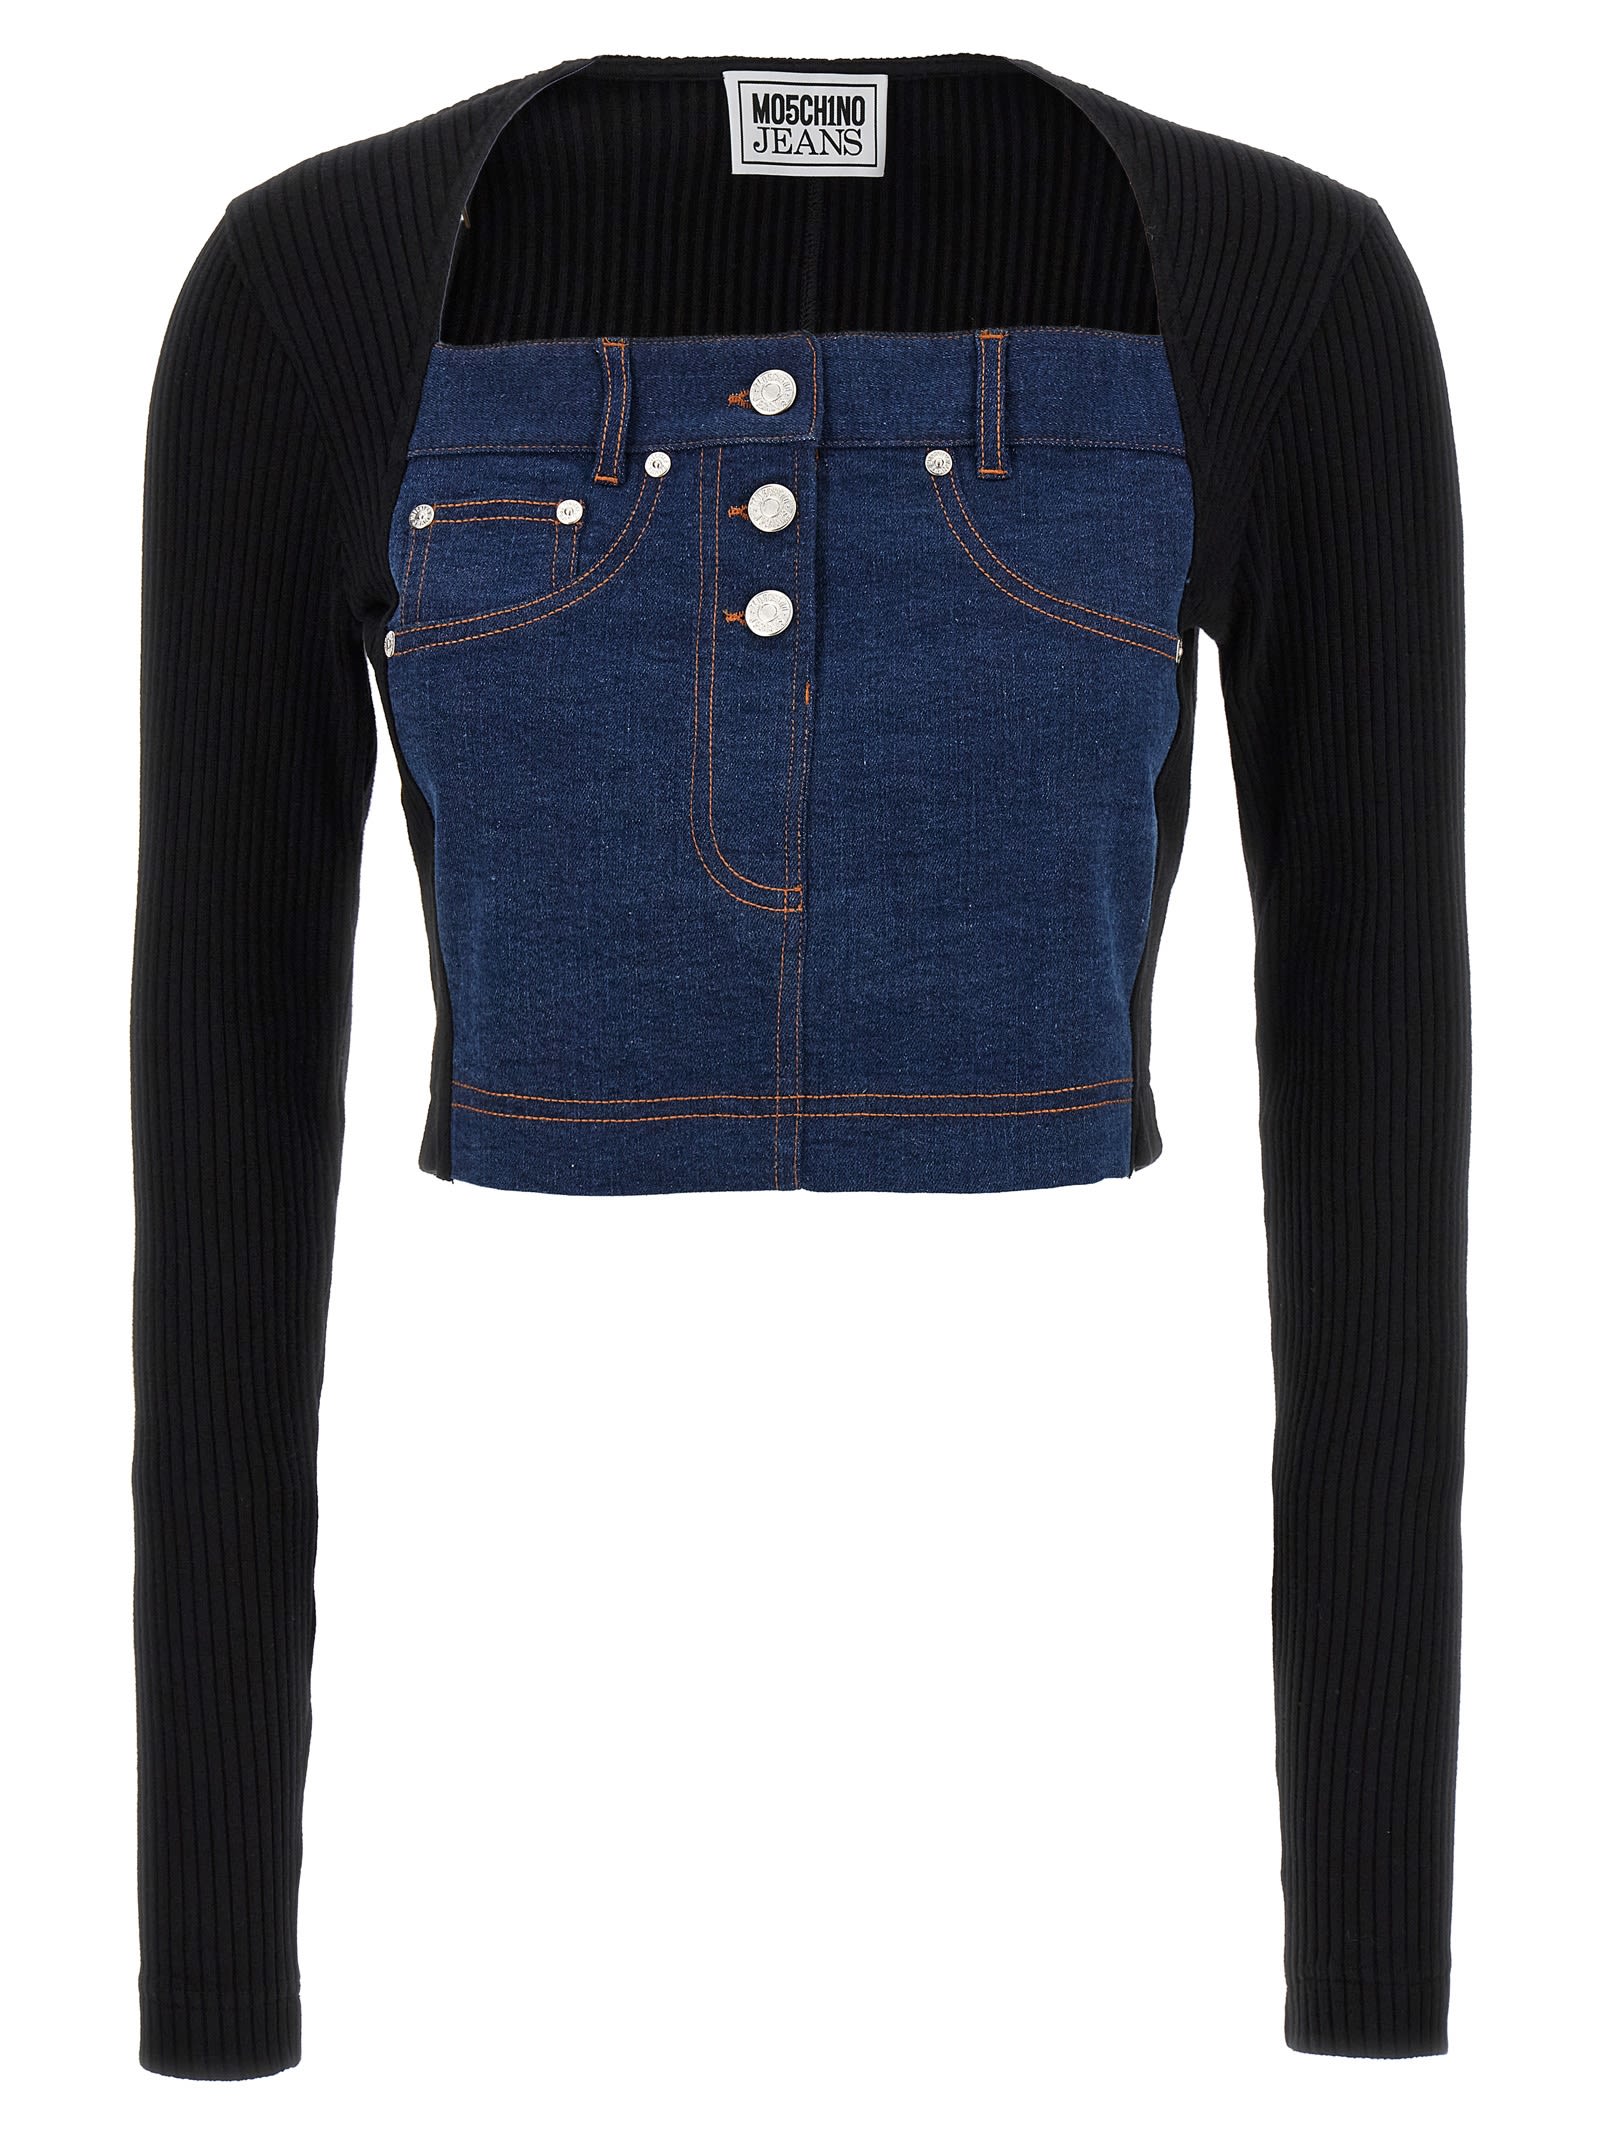 Shop M05ch1n0 Jeans Denim Top And Ribbed Knit In Black/blue